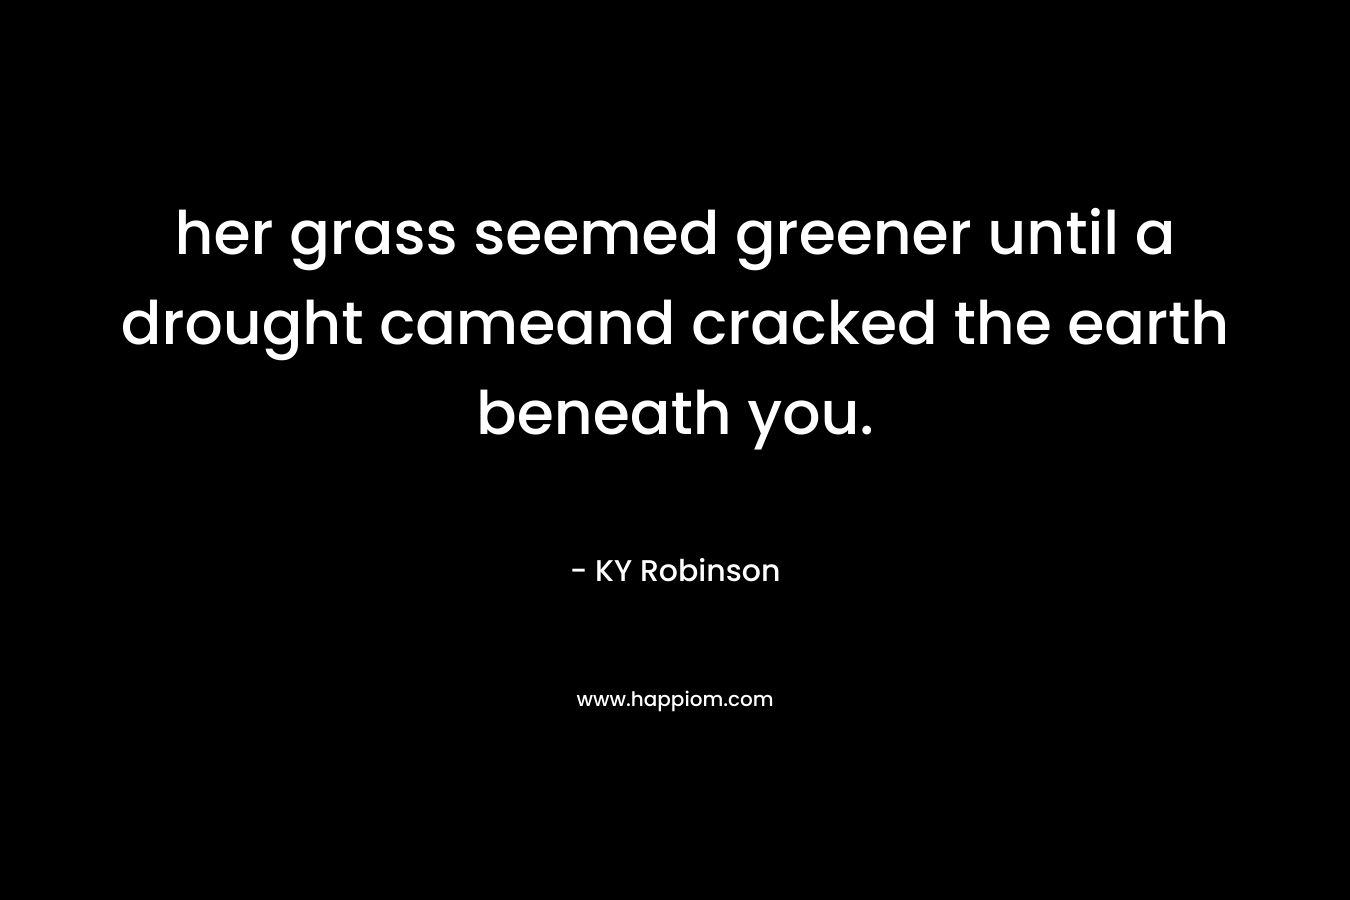 her grass seemed greener until a drought cameand cracked the earth beneath you.